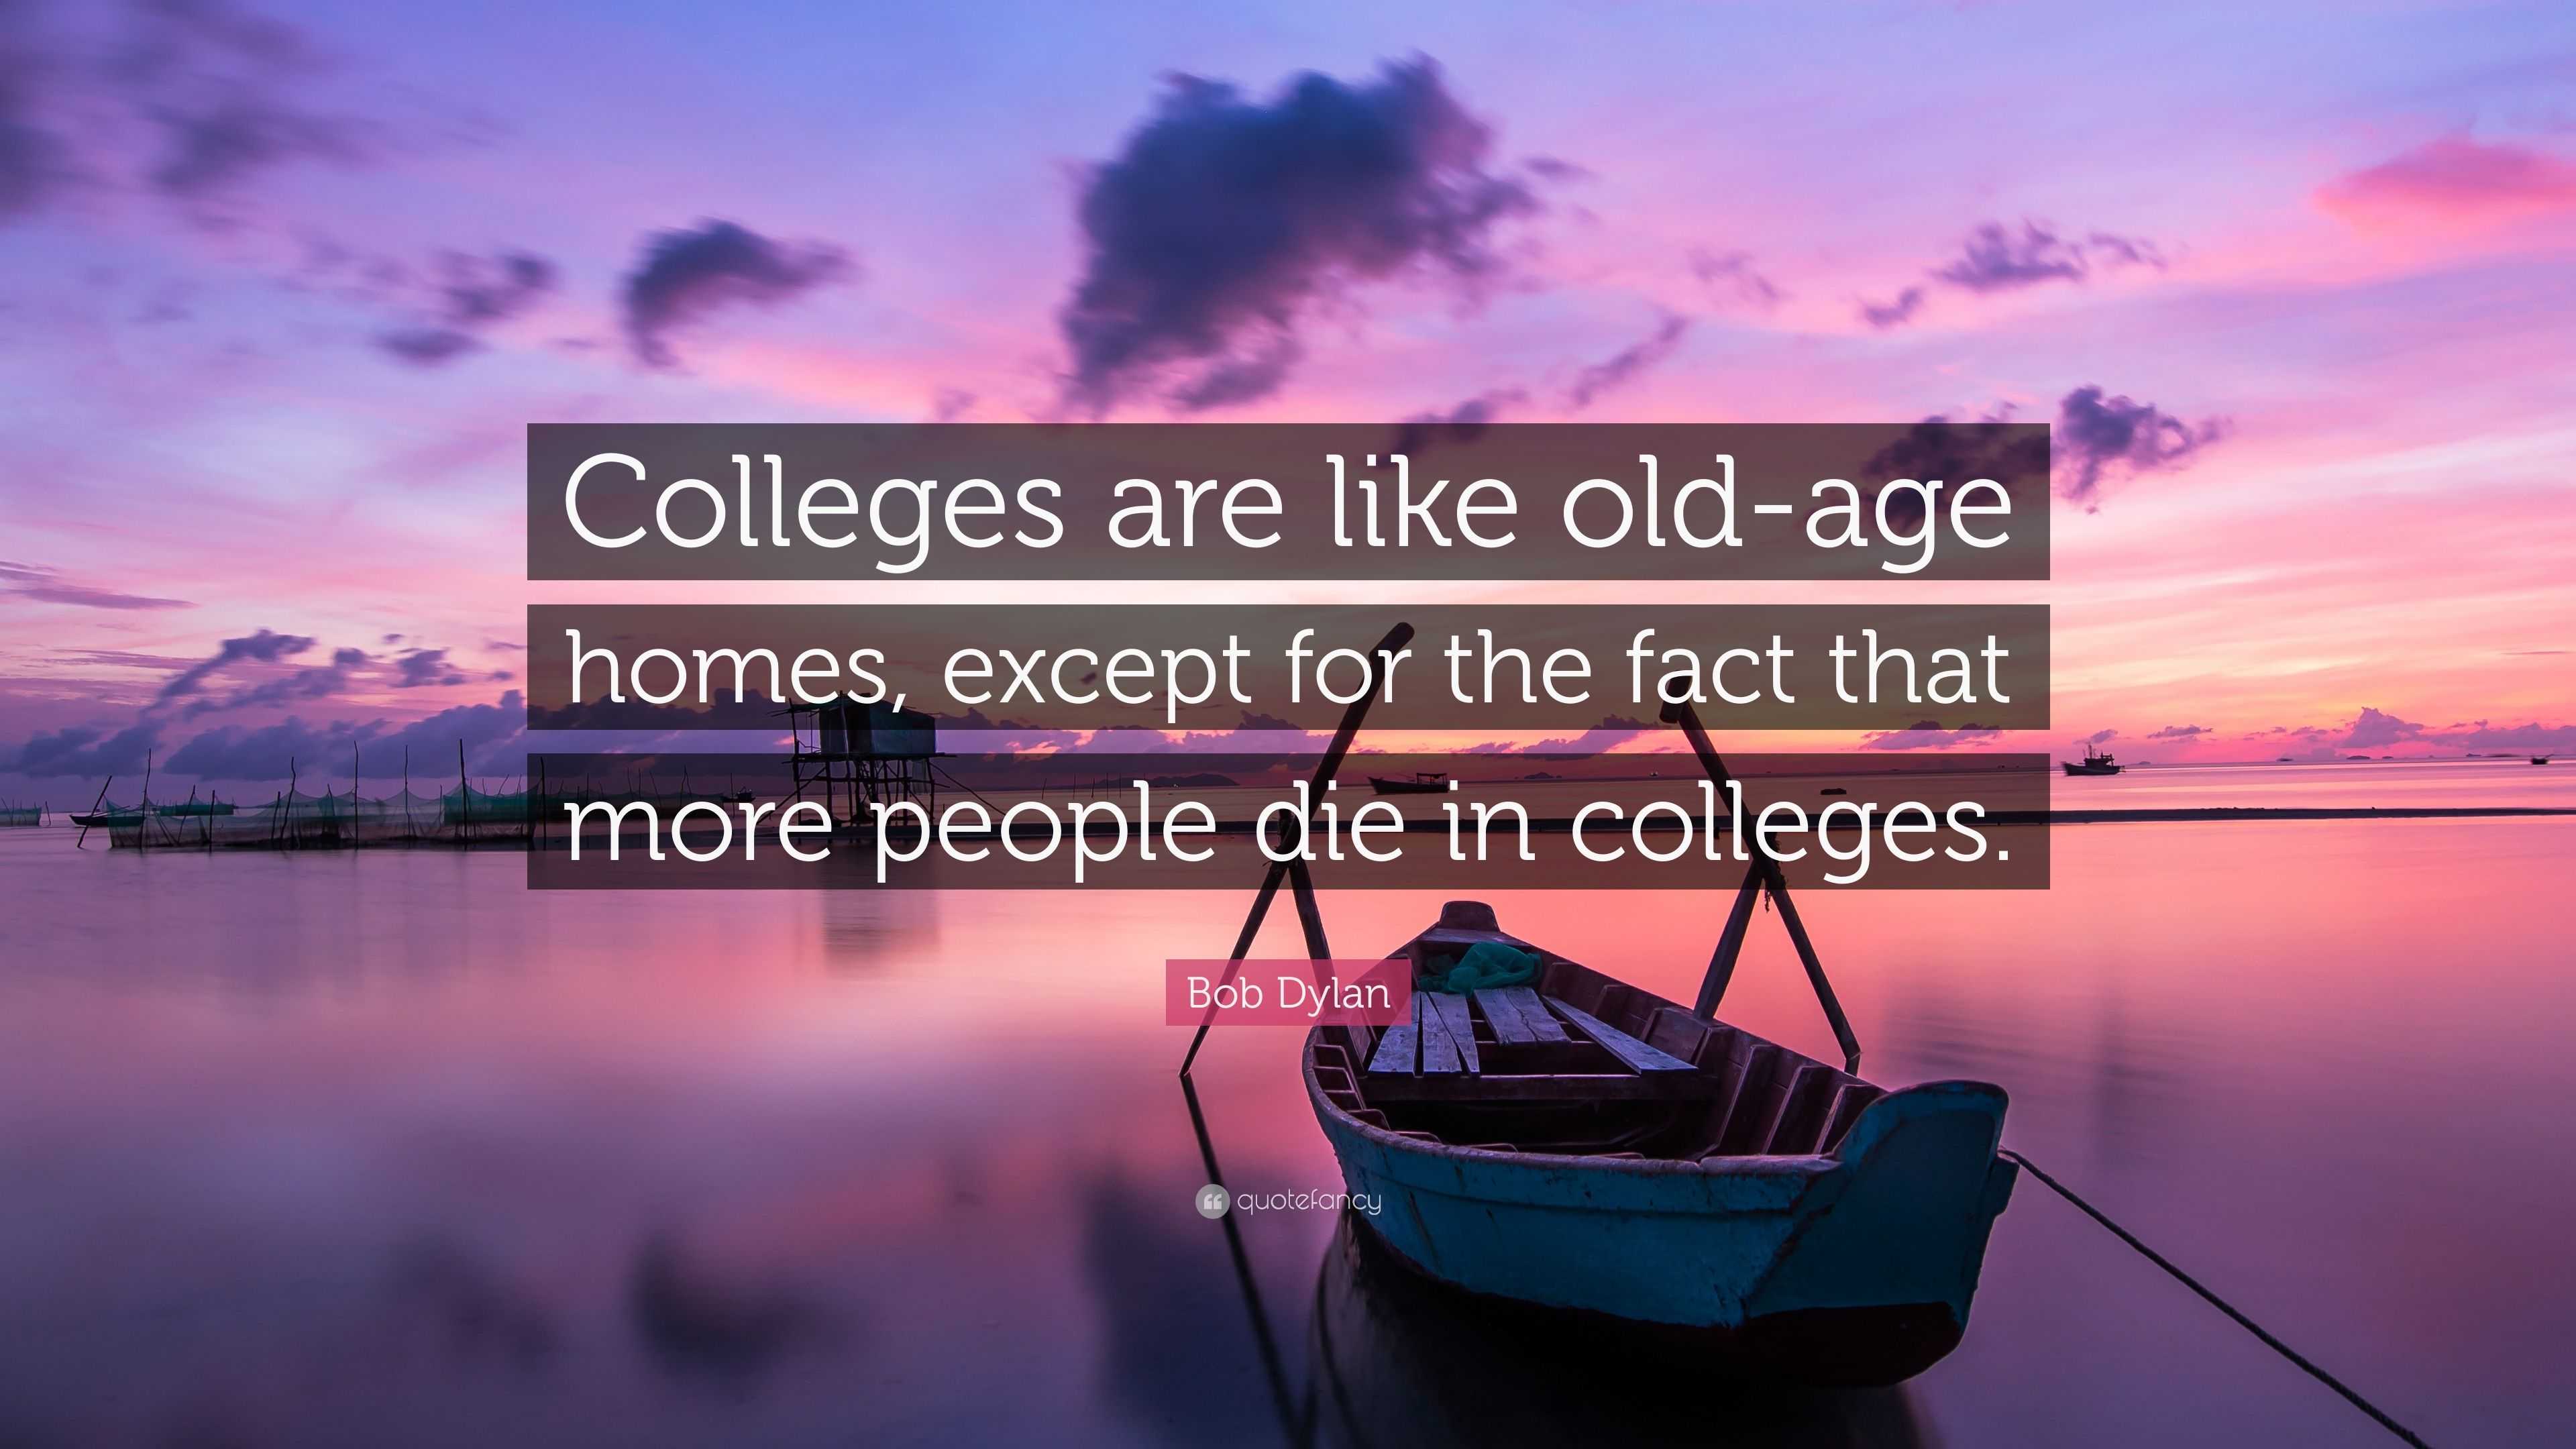 Bob Dylan Quote Colleges Are Like Old Age Homes Except For The Fact That More People